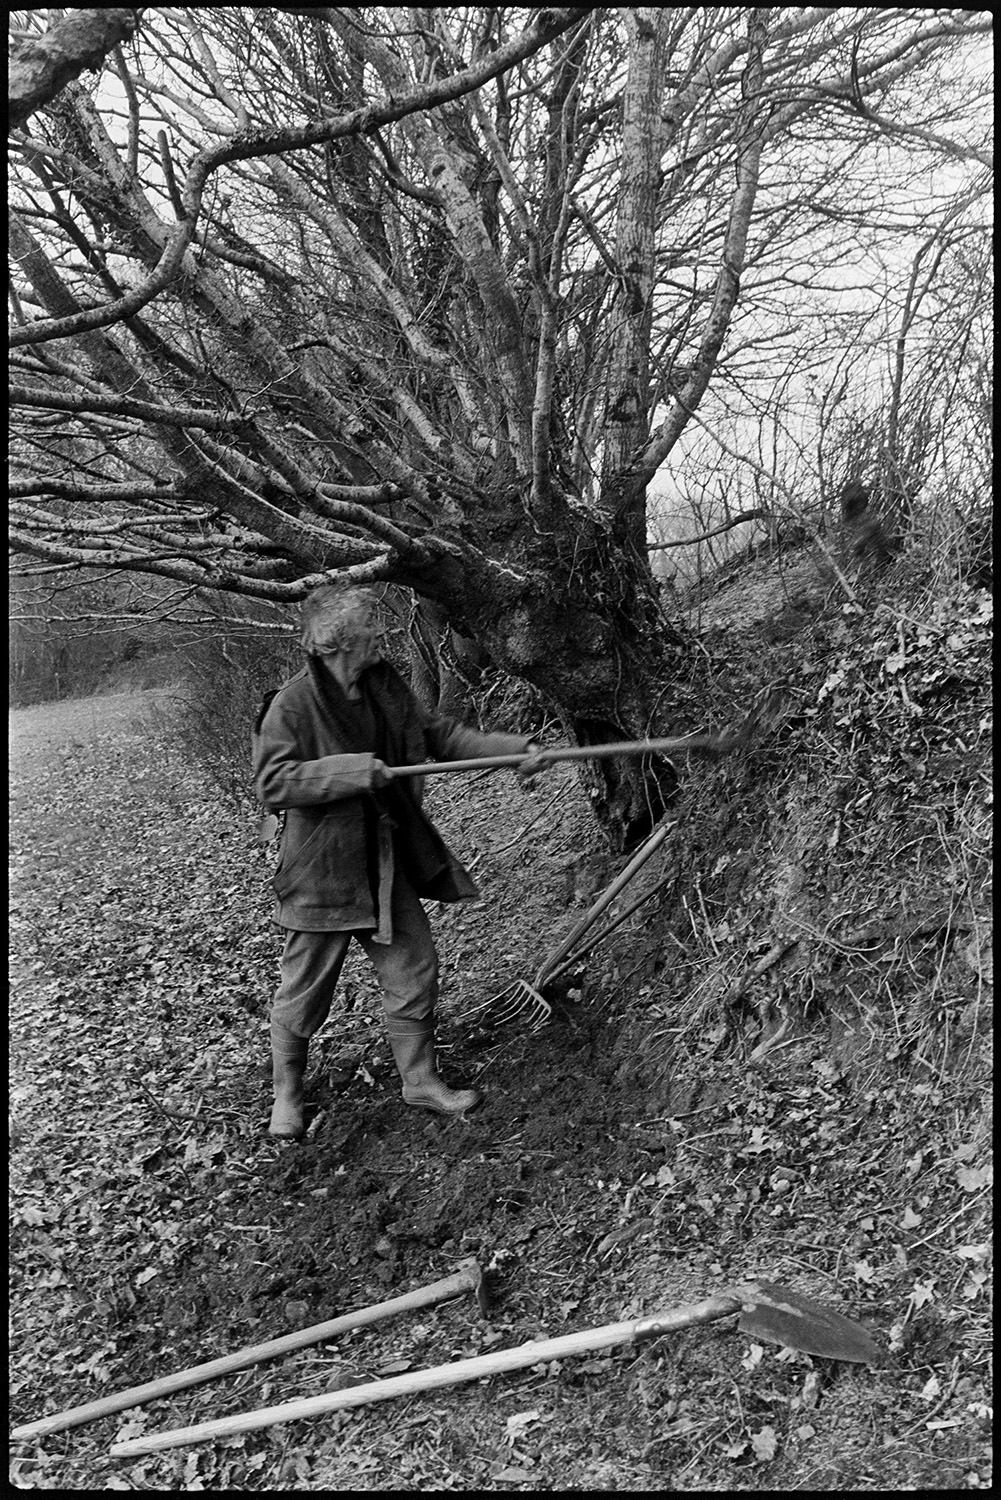 Man clatting building up old hedgebank, sitting in shelter of corrugated iron. 
[Fred Moule clatting or building up a hedgerow with turf, using a spade, in a field at Woolridge, Dolton. A fork and another spade are laid on the ground nearby.]